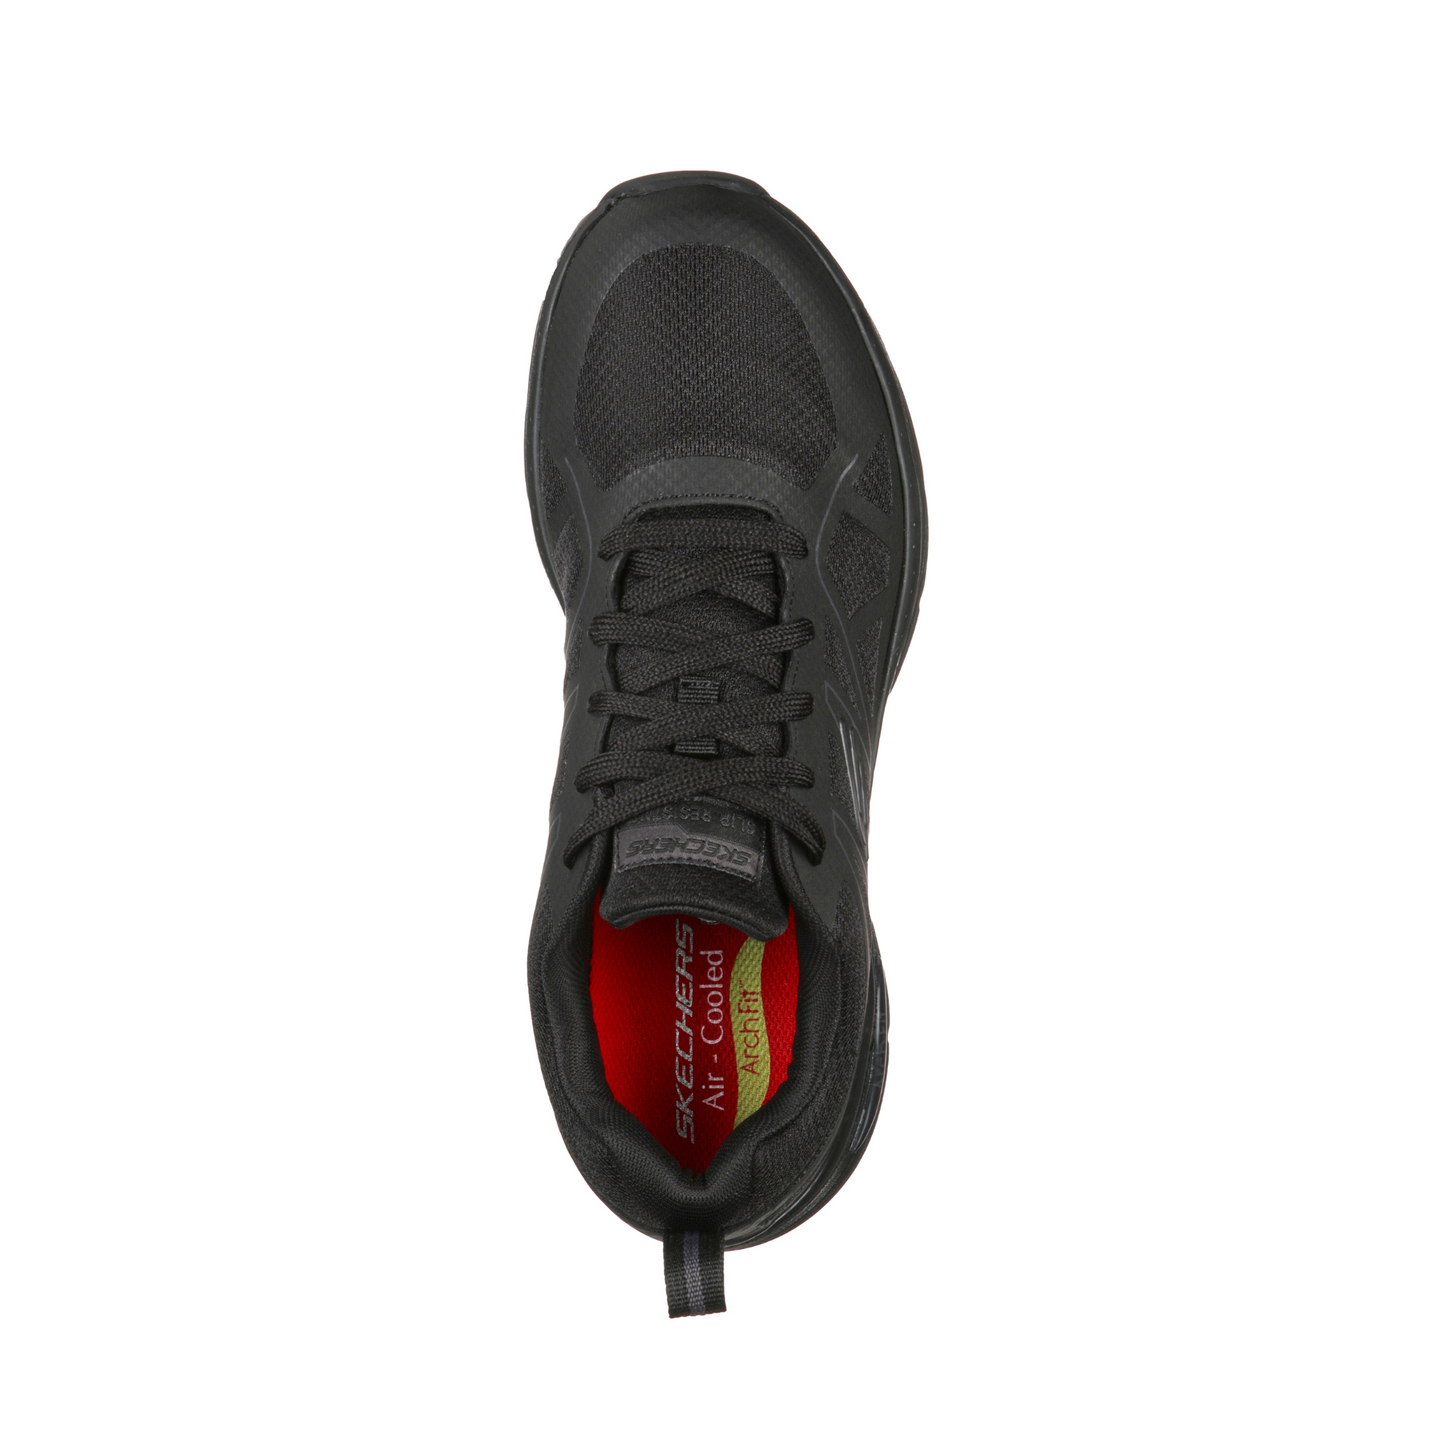 Skechers Arch Fit Axtell Black